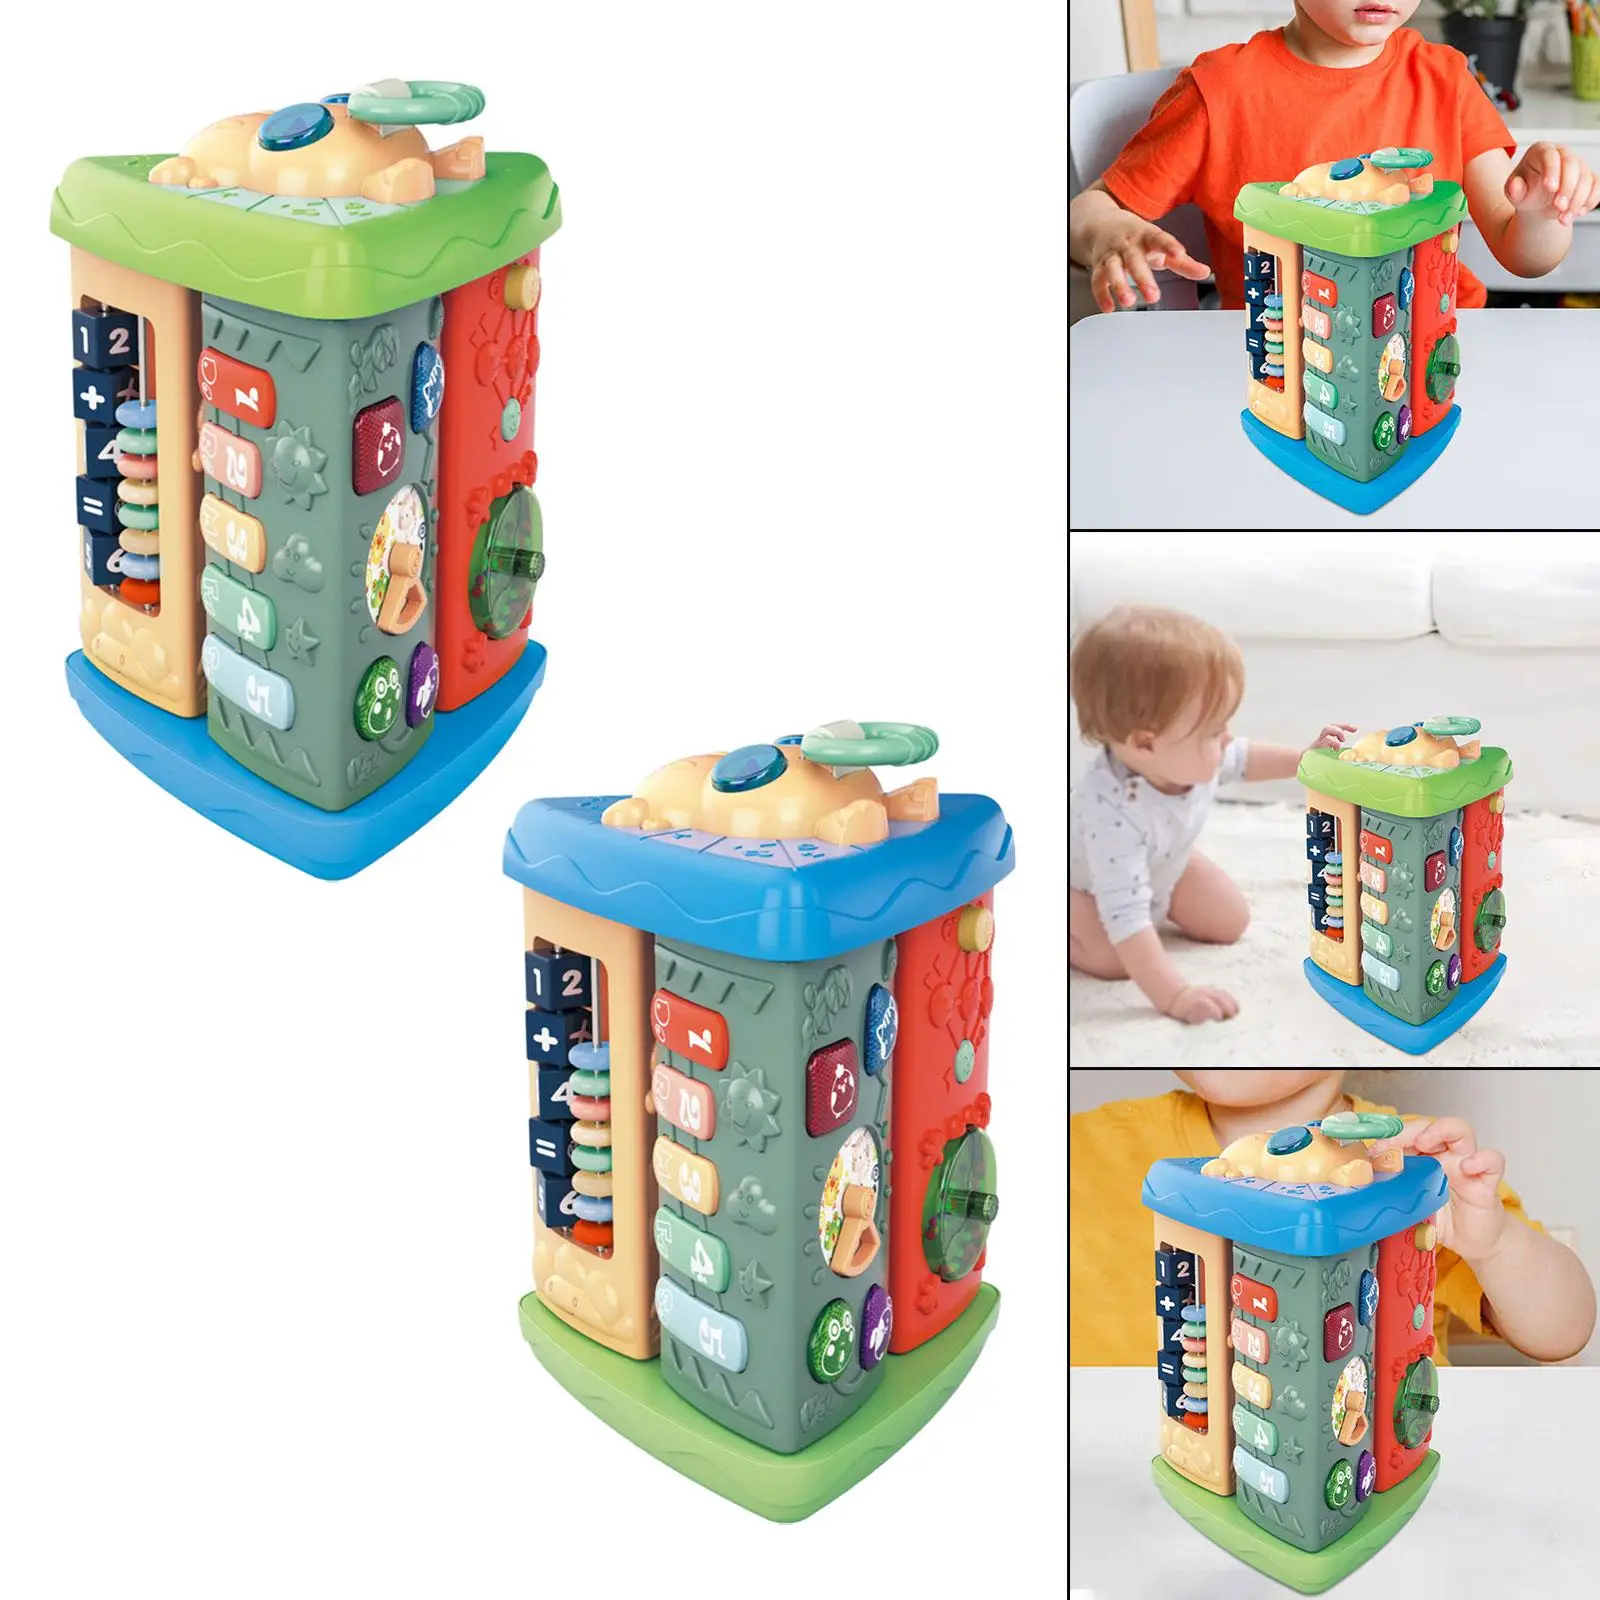 Musical Activity Toy Early Development Activity Toy Musical Activity Cube for Girls Preschool Children Toddlers Holiday Gifts